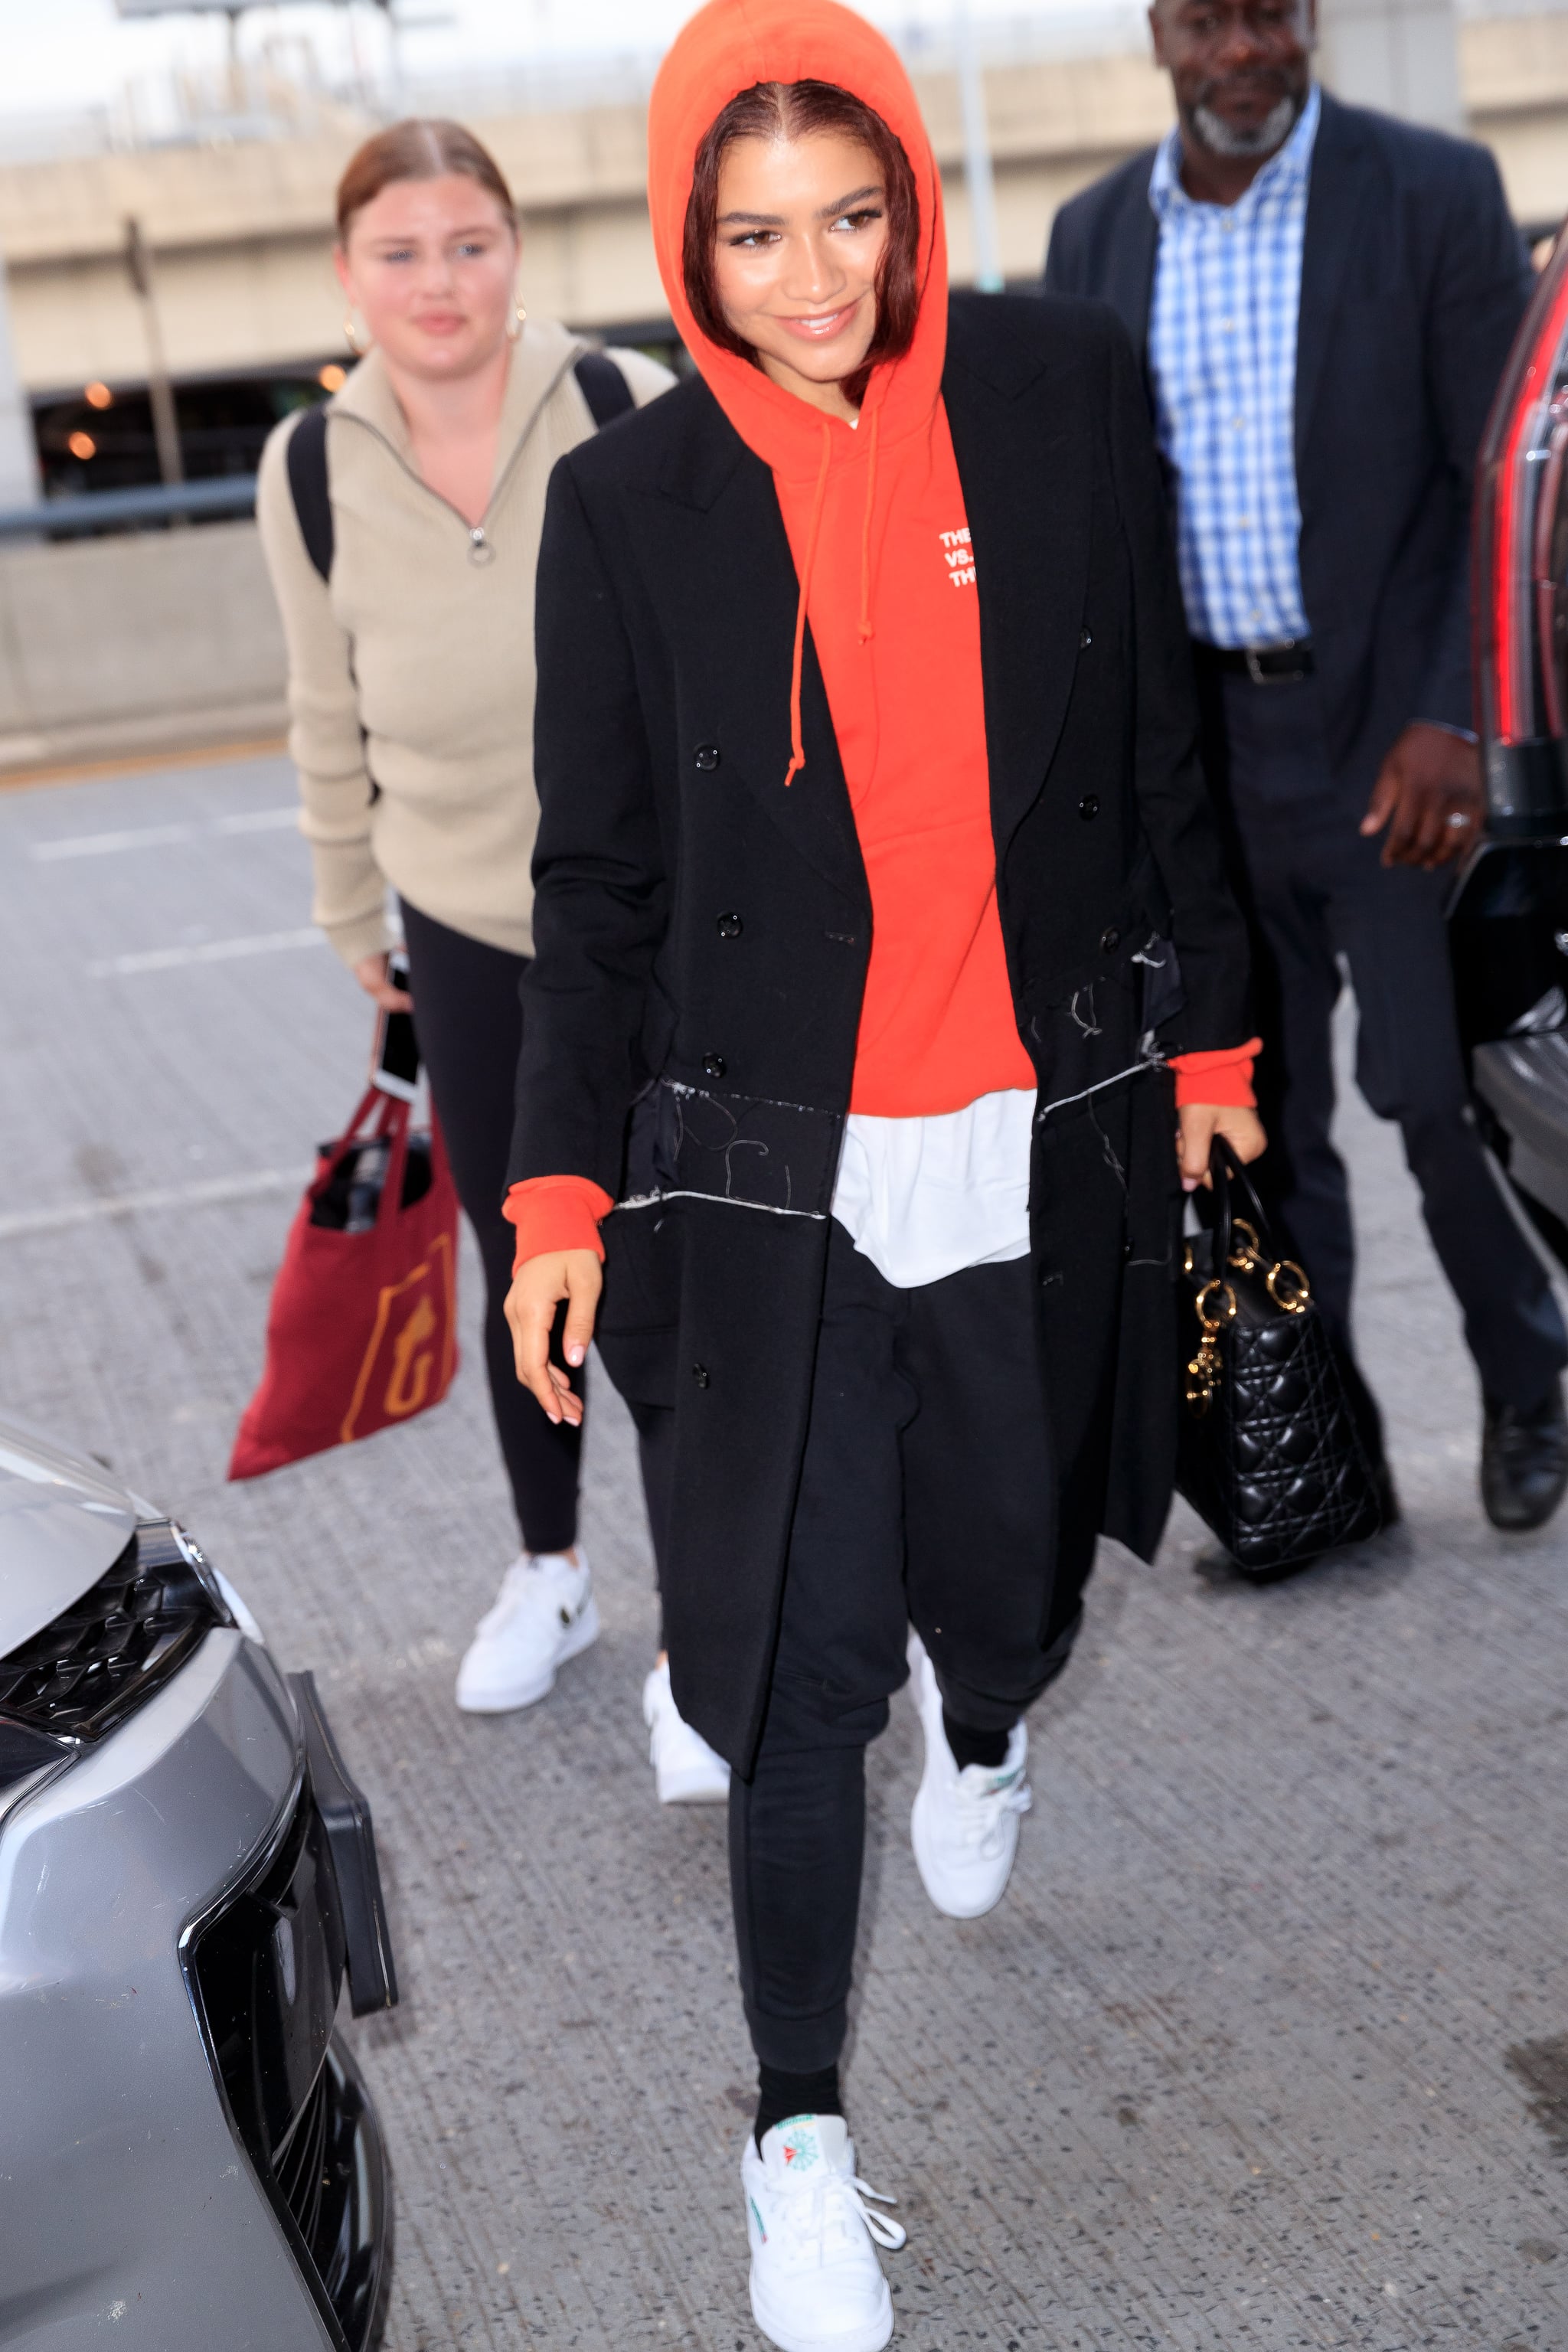 Zendaya's Street Style, Zendaya's Street Style Is So Stinkin' Cool, I'm  Ready For Her Autograph